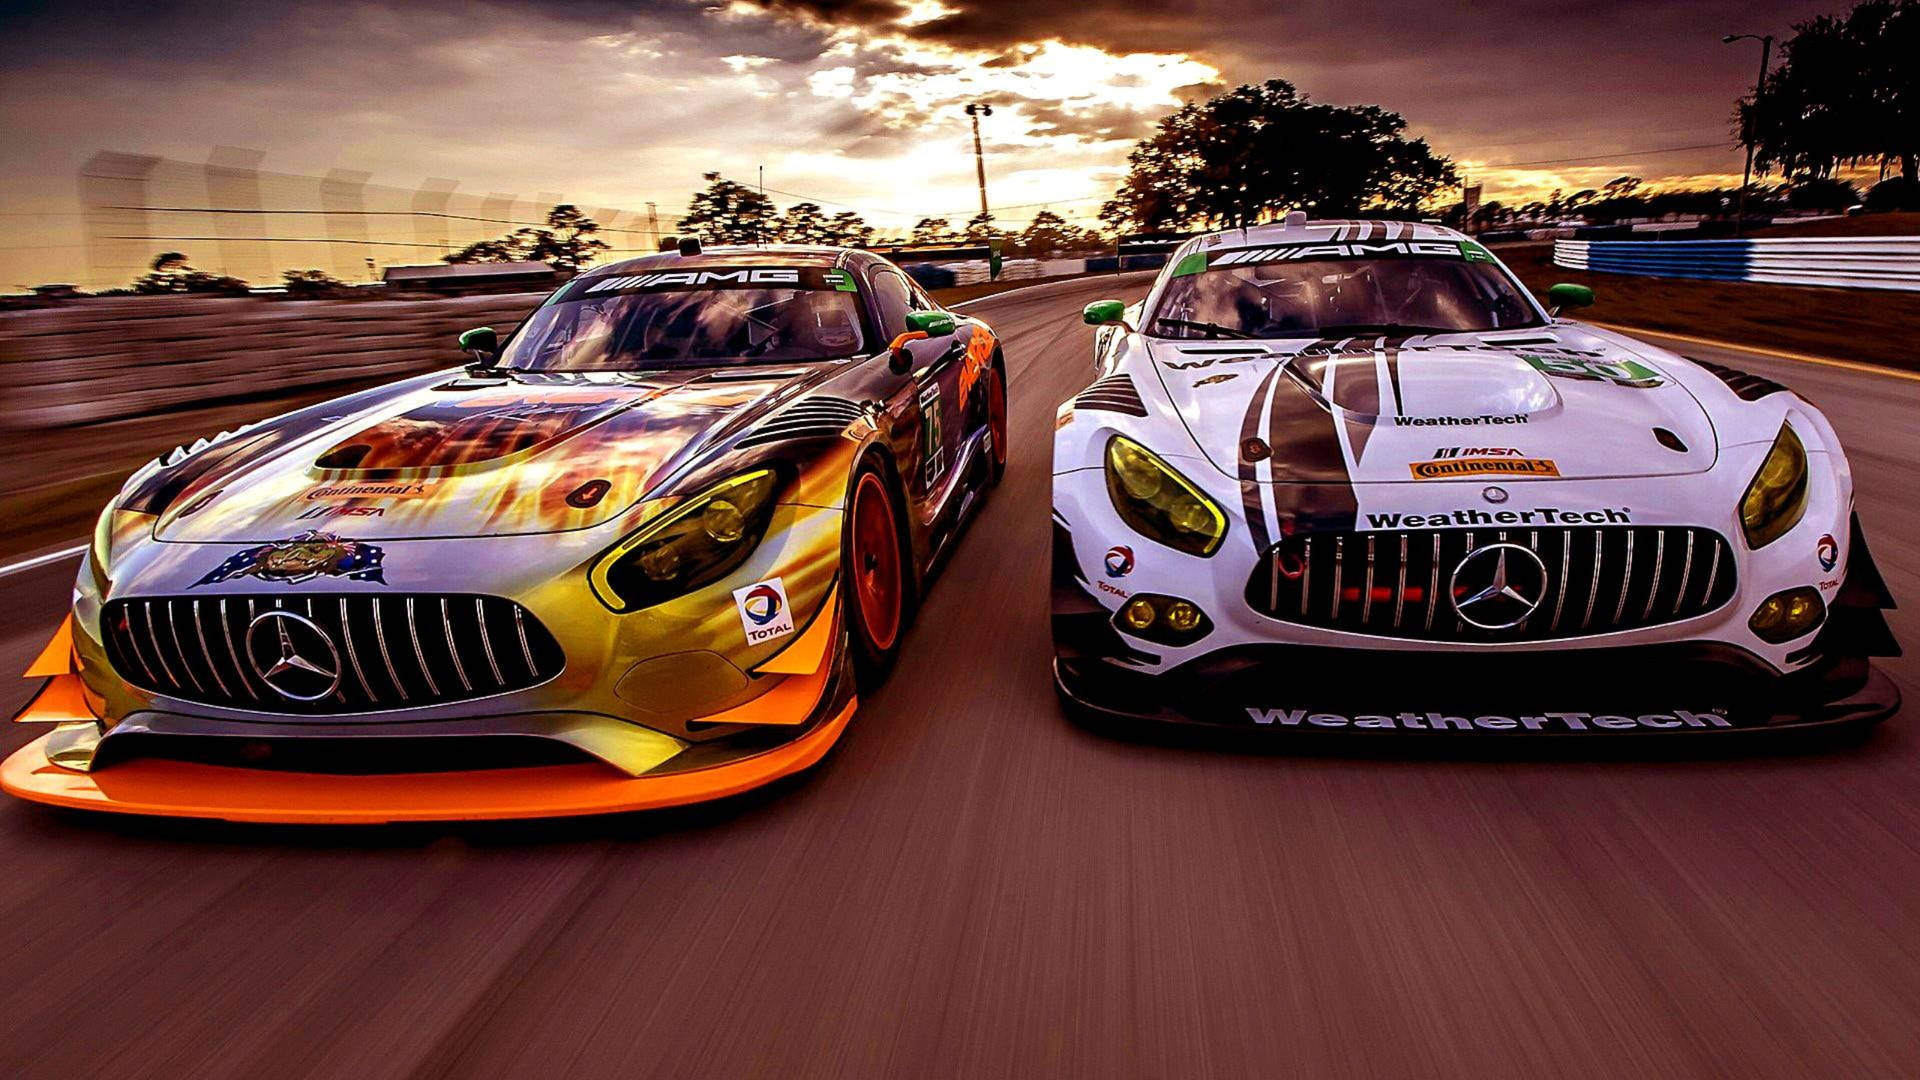 Two Mercedes Benz Racing Cars